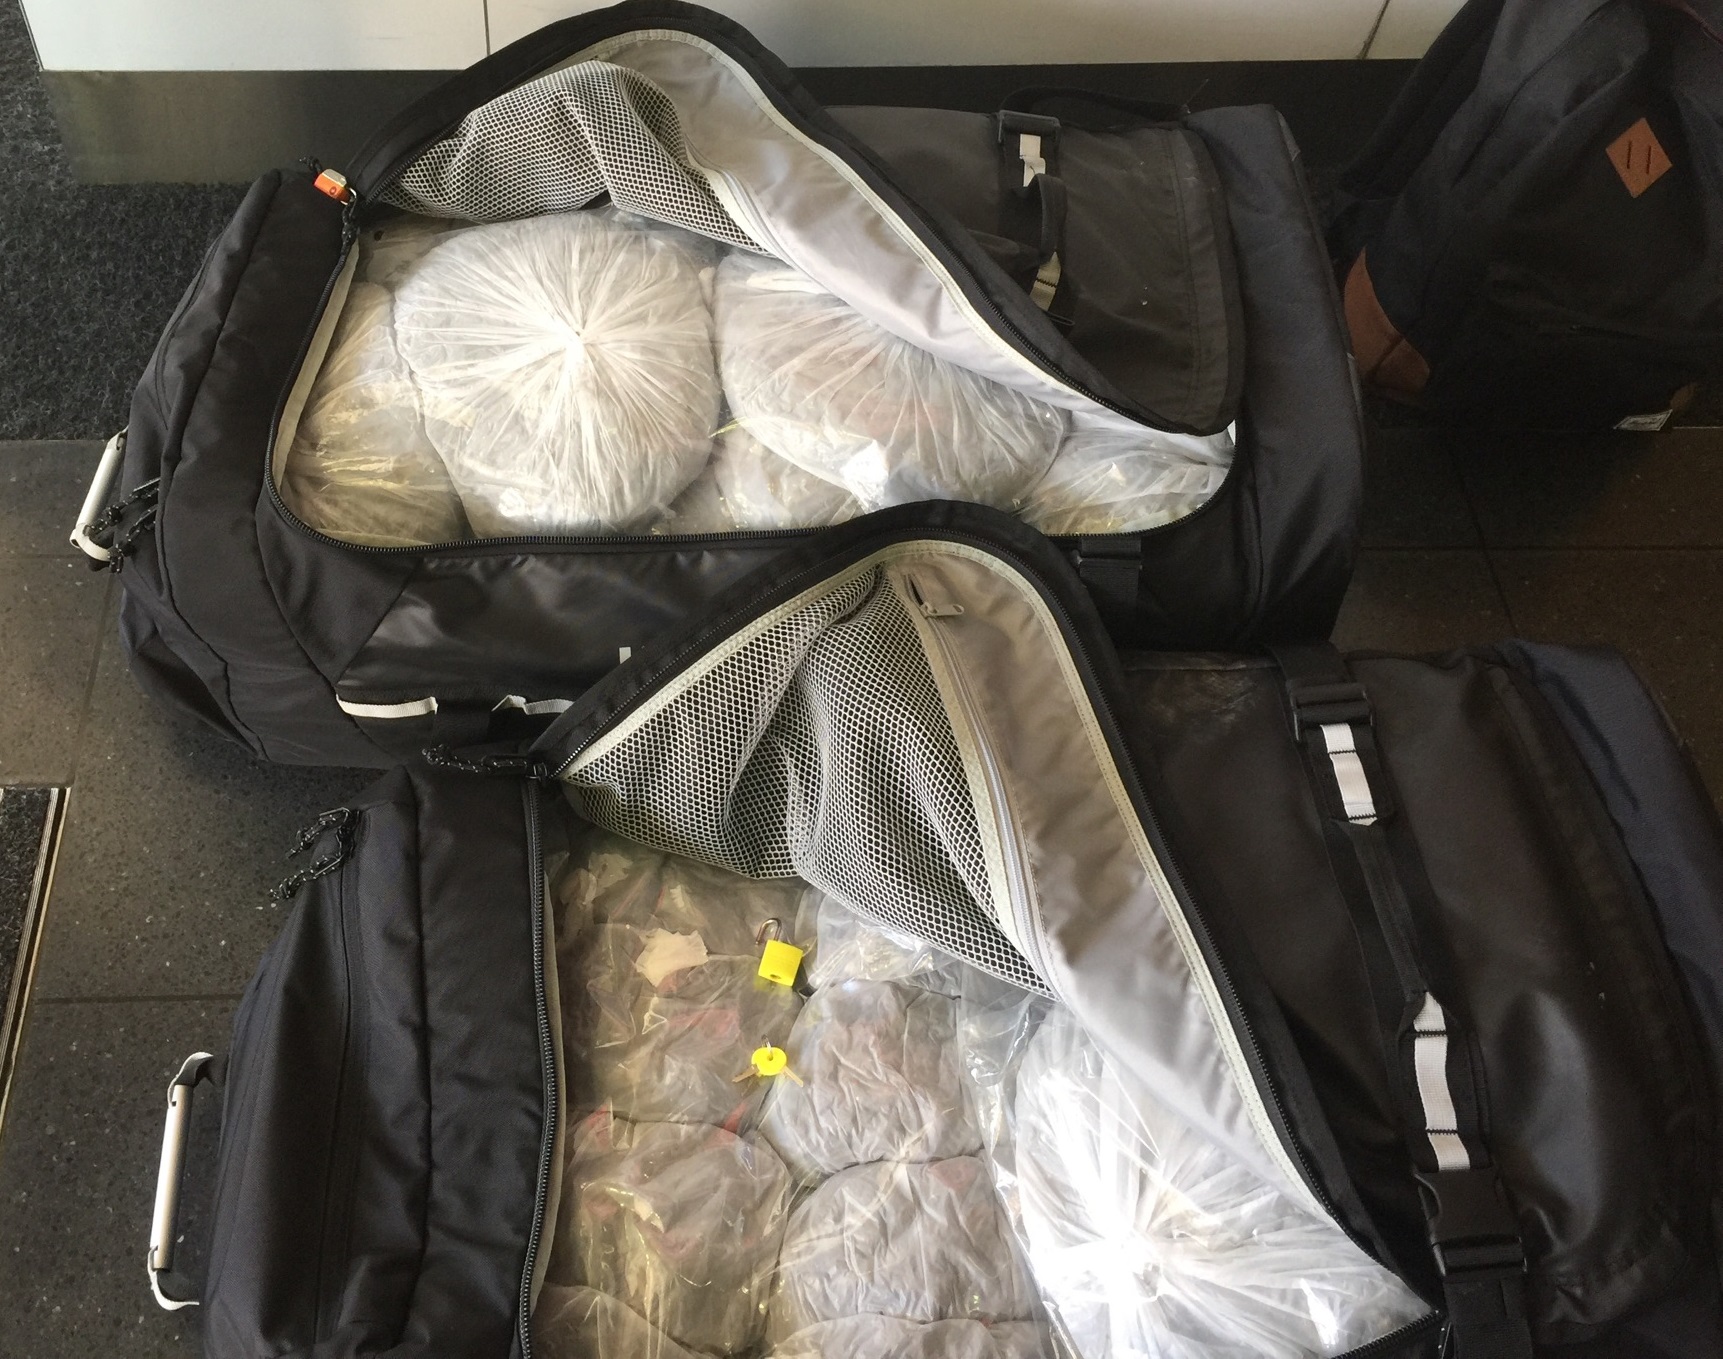 Arizona Man Gets 4 Years Probation For Smuggling 24 Pounds Of Ganja To St. Croix